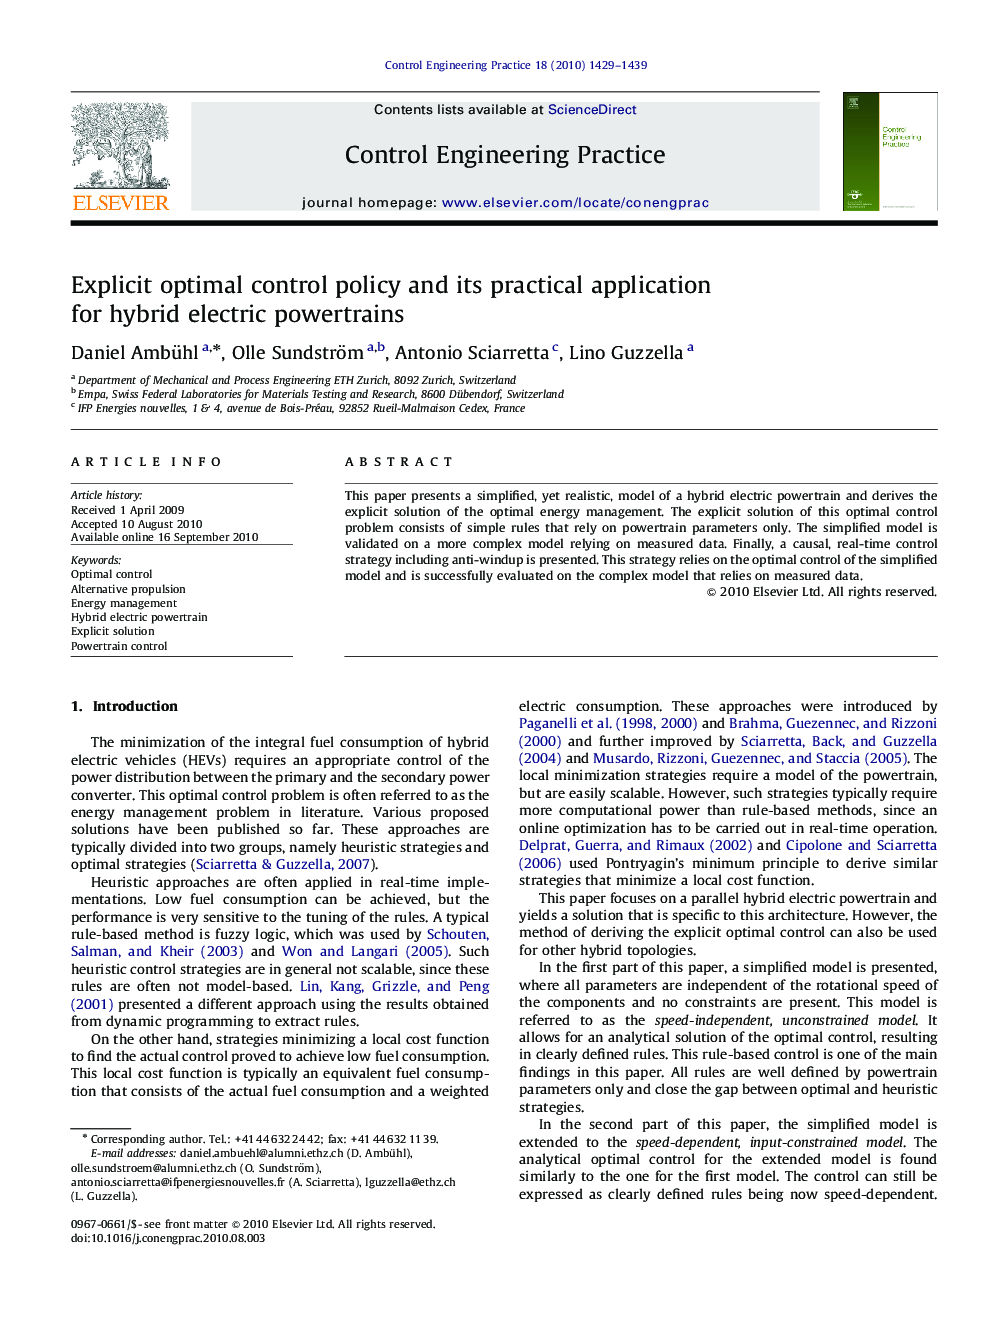 Explicit optimal control policy and its practical application for hybrid electric powertrains